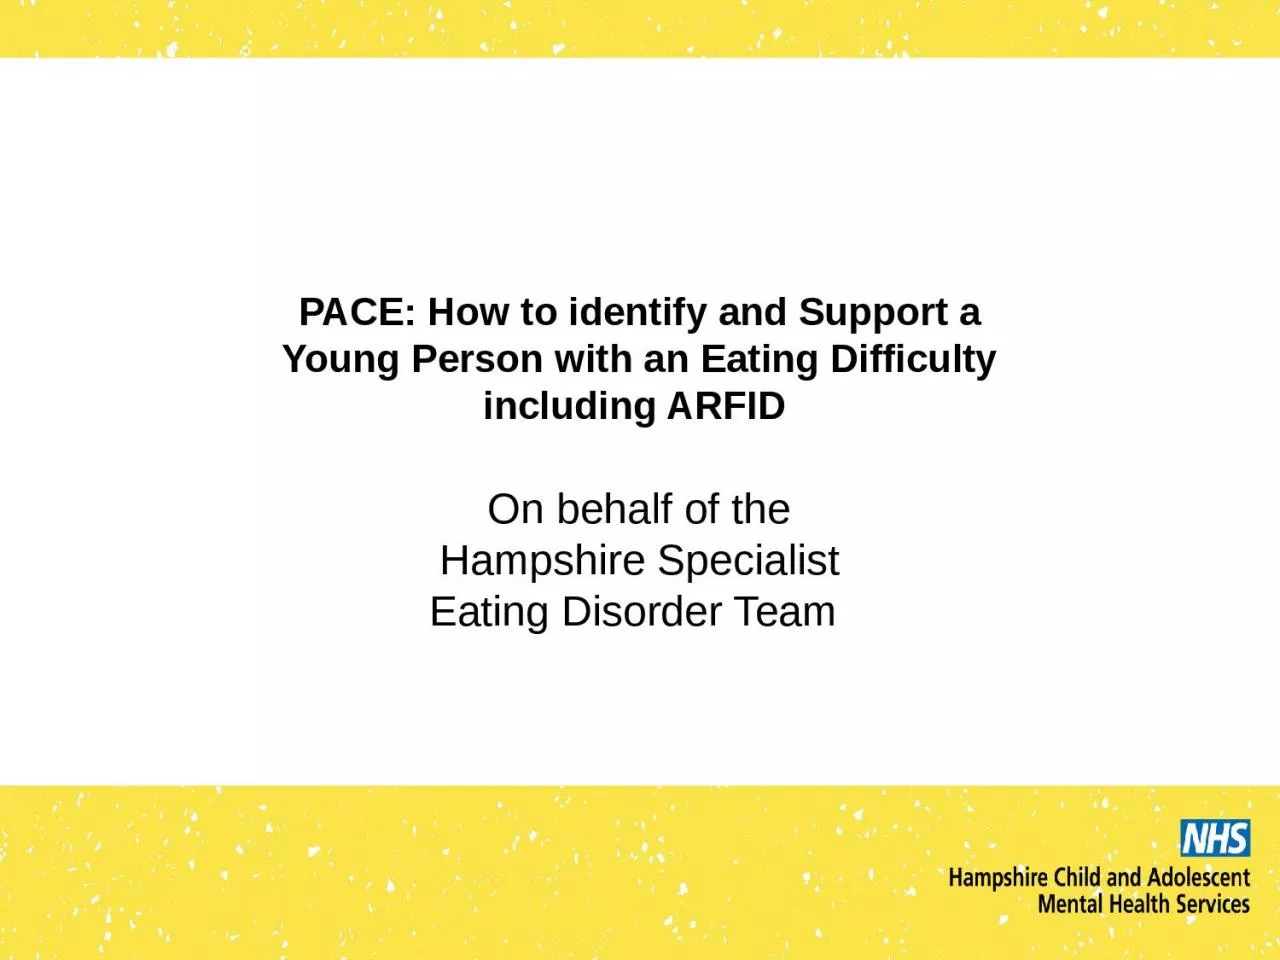 PACE: How to identify and Support a Young Person with an Eating Difficulty including ARFID